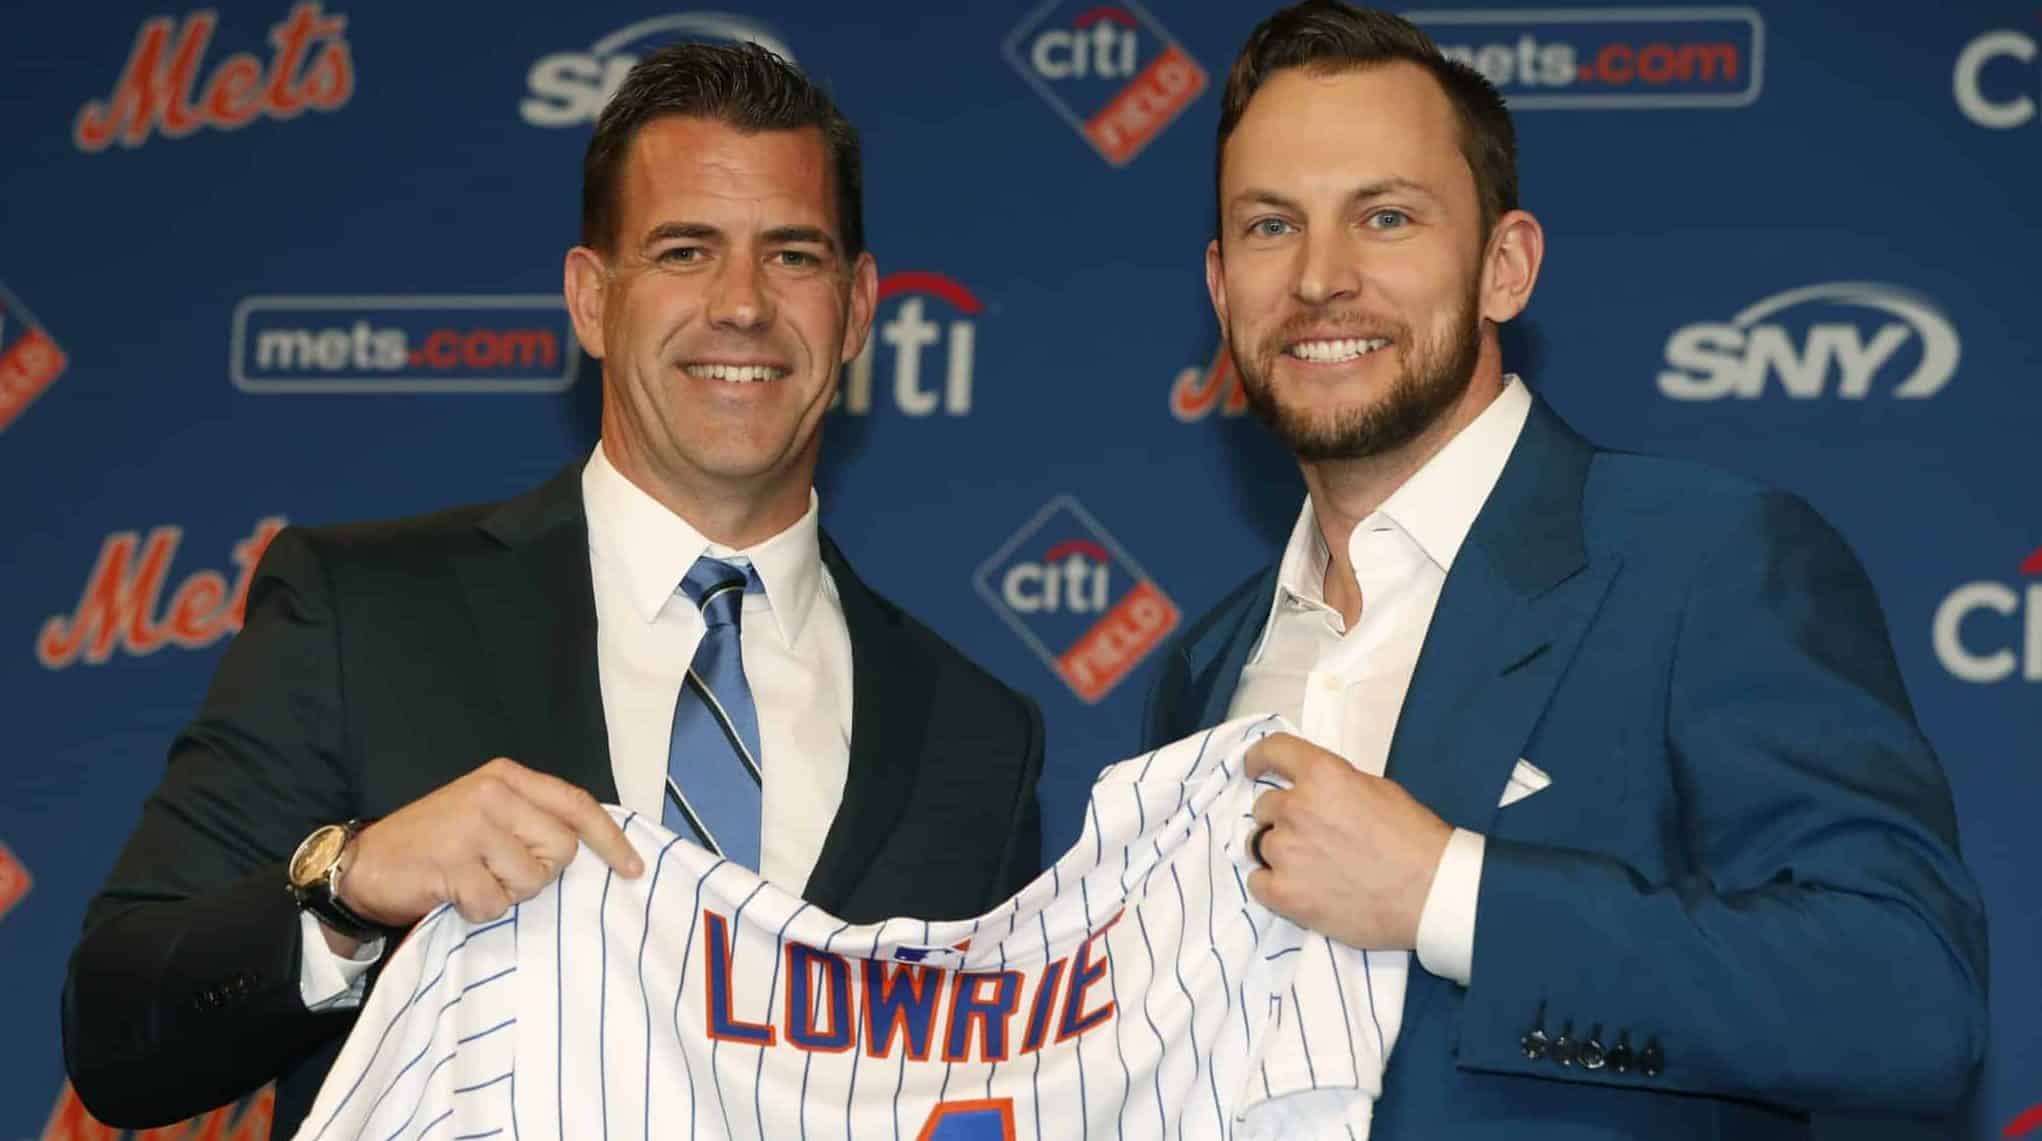 FILE - In this Jan. 16, 2019, file photo, New York Mets general manager Brodie Van Wagenen, left, poses for a photograph with new infielder Jed Lowrie during a baseball news conference in New York.